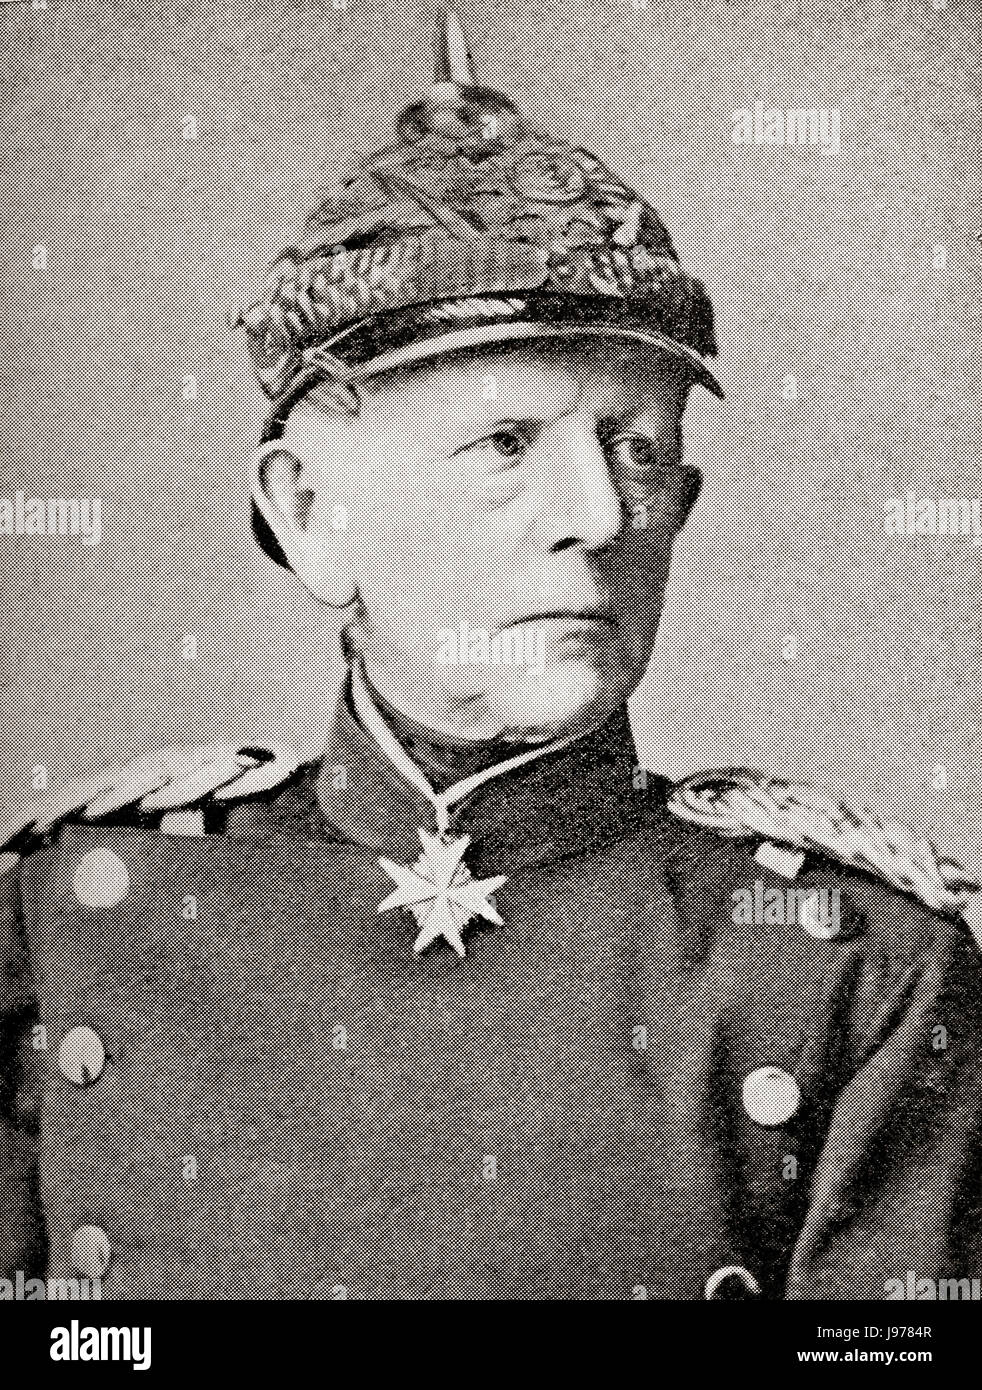 Helmuth Karl Bernhard Graf von Moltke, 1800 - 1891.  German Field Marshal and chief of staff of the Prussian Army.   From Hutchinson's History of the Nations, published 1915. Stock Photo